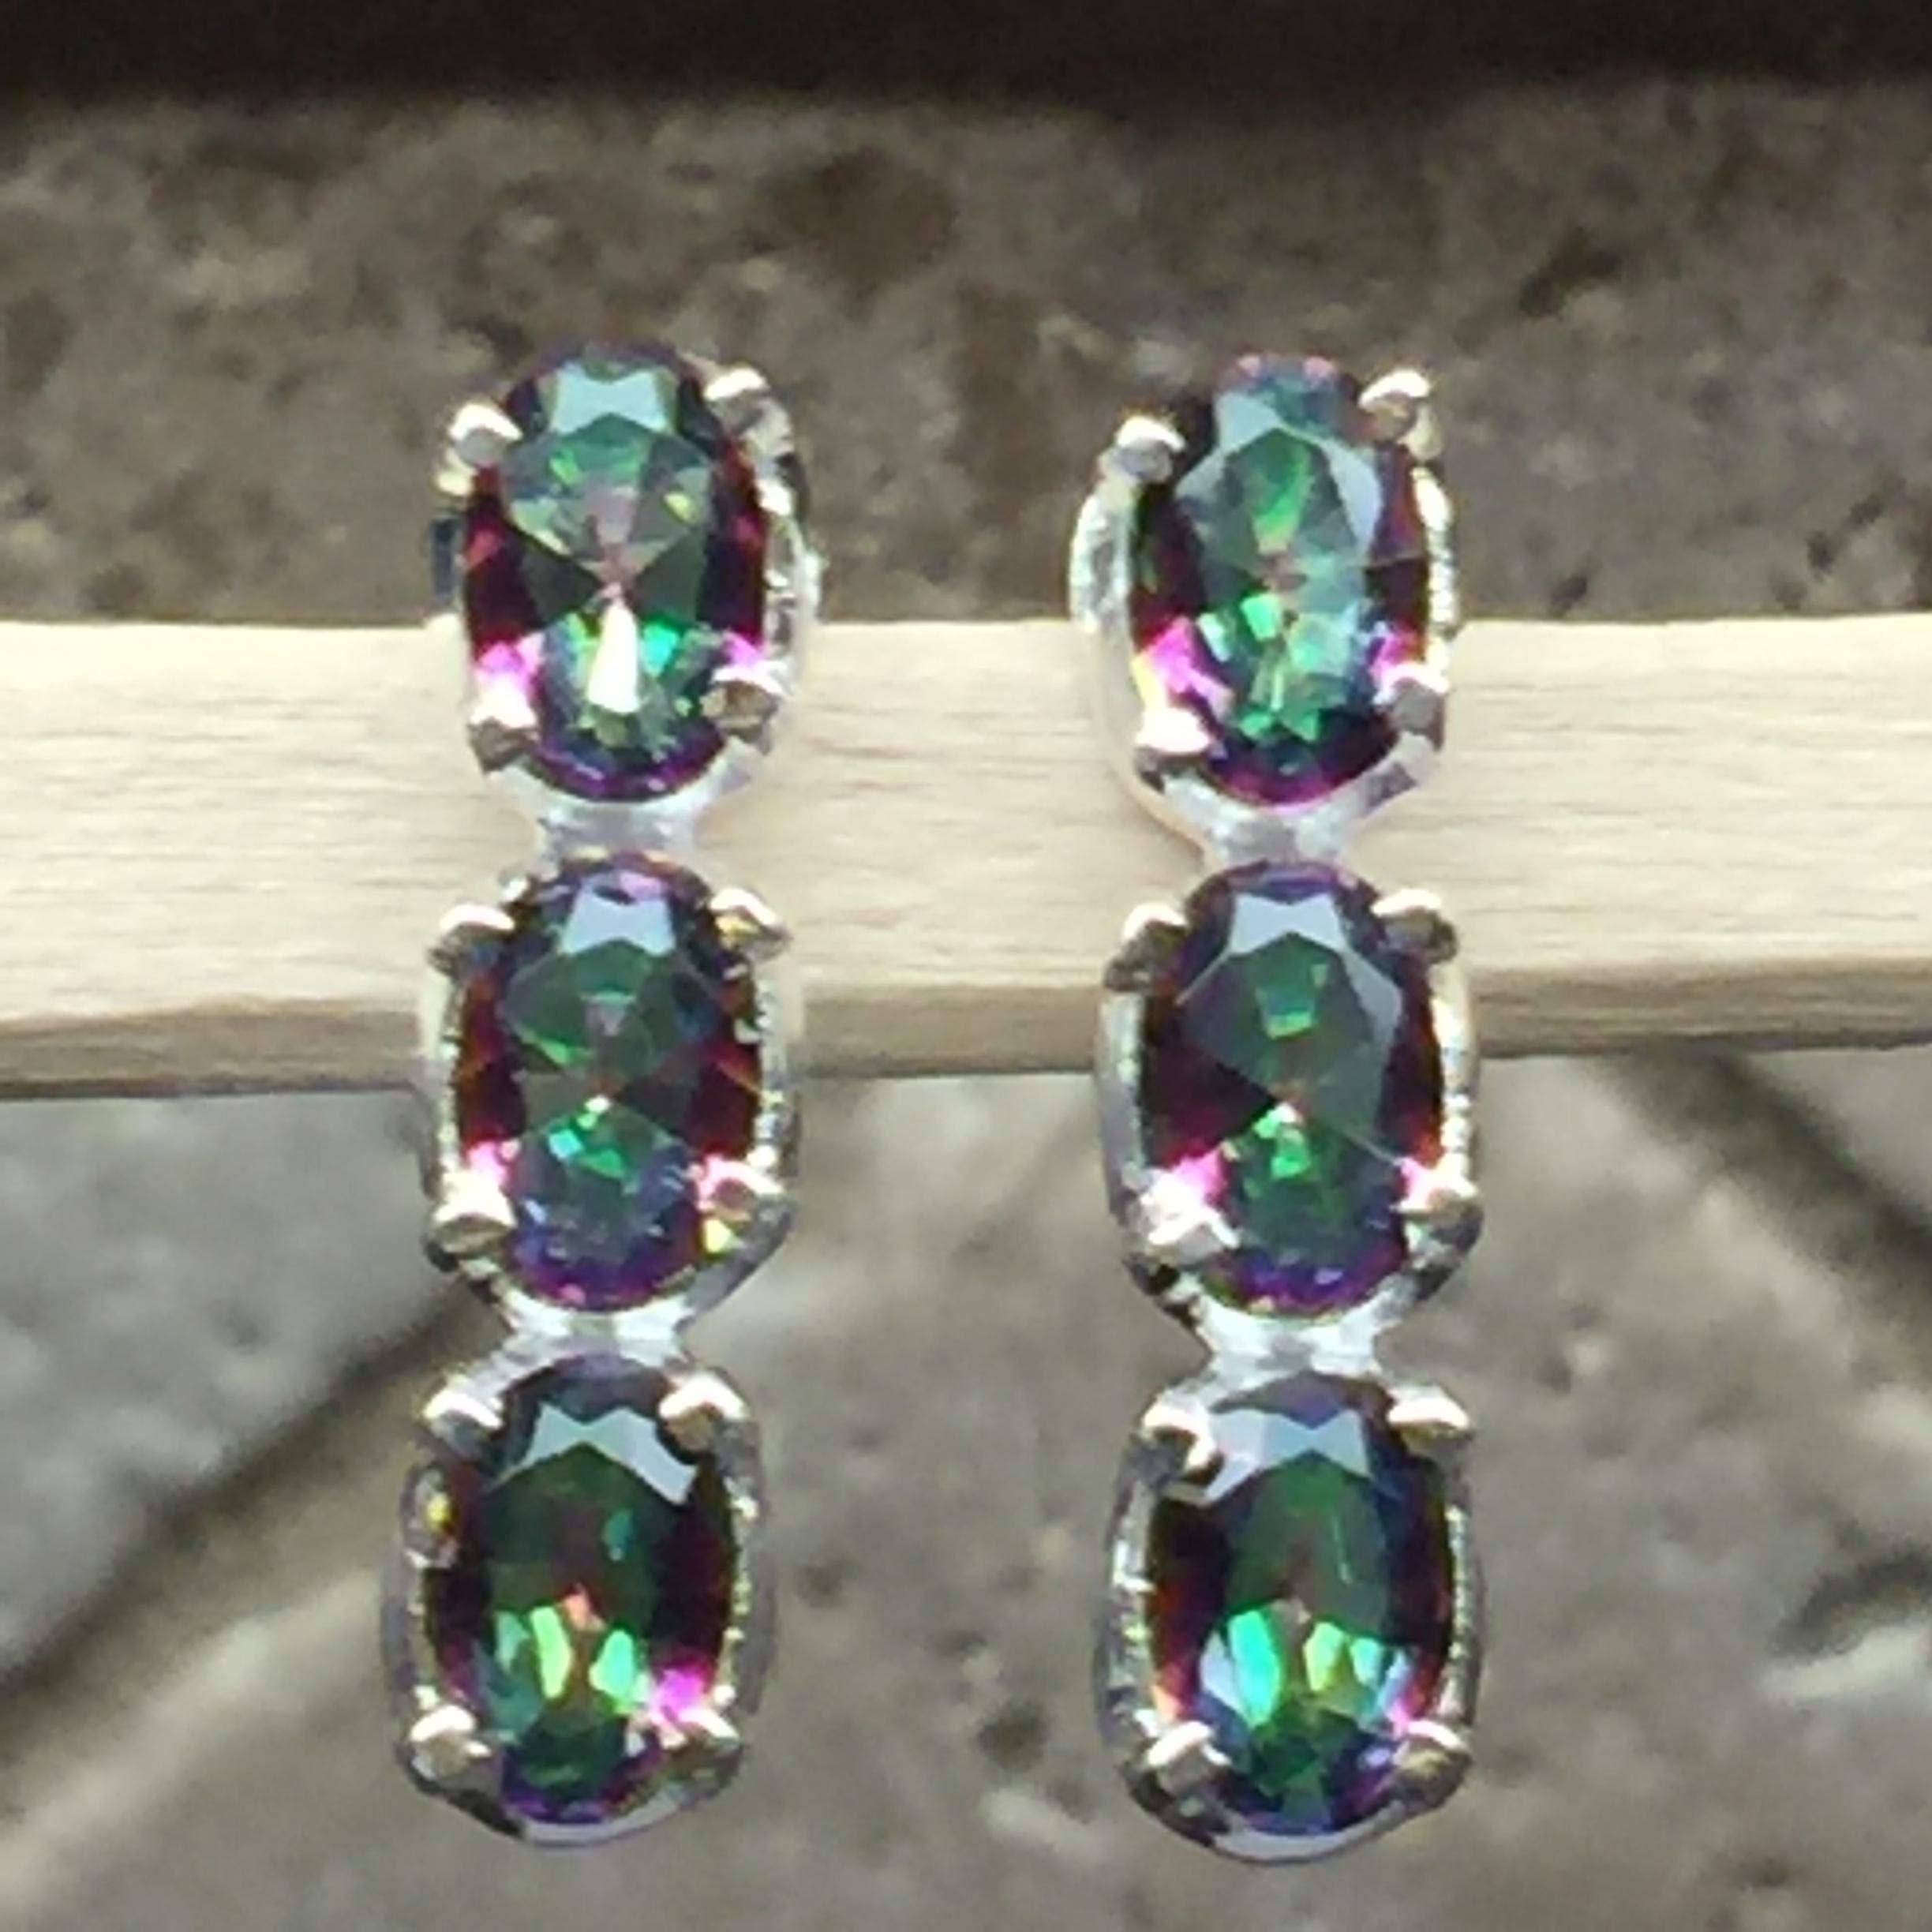 Gorgeous 2.5ct Mystic Topaz 925 Solid Sterling Silver Earrings 16mm - Natural Rocks by Kala